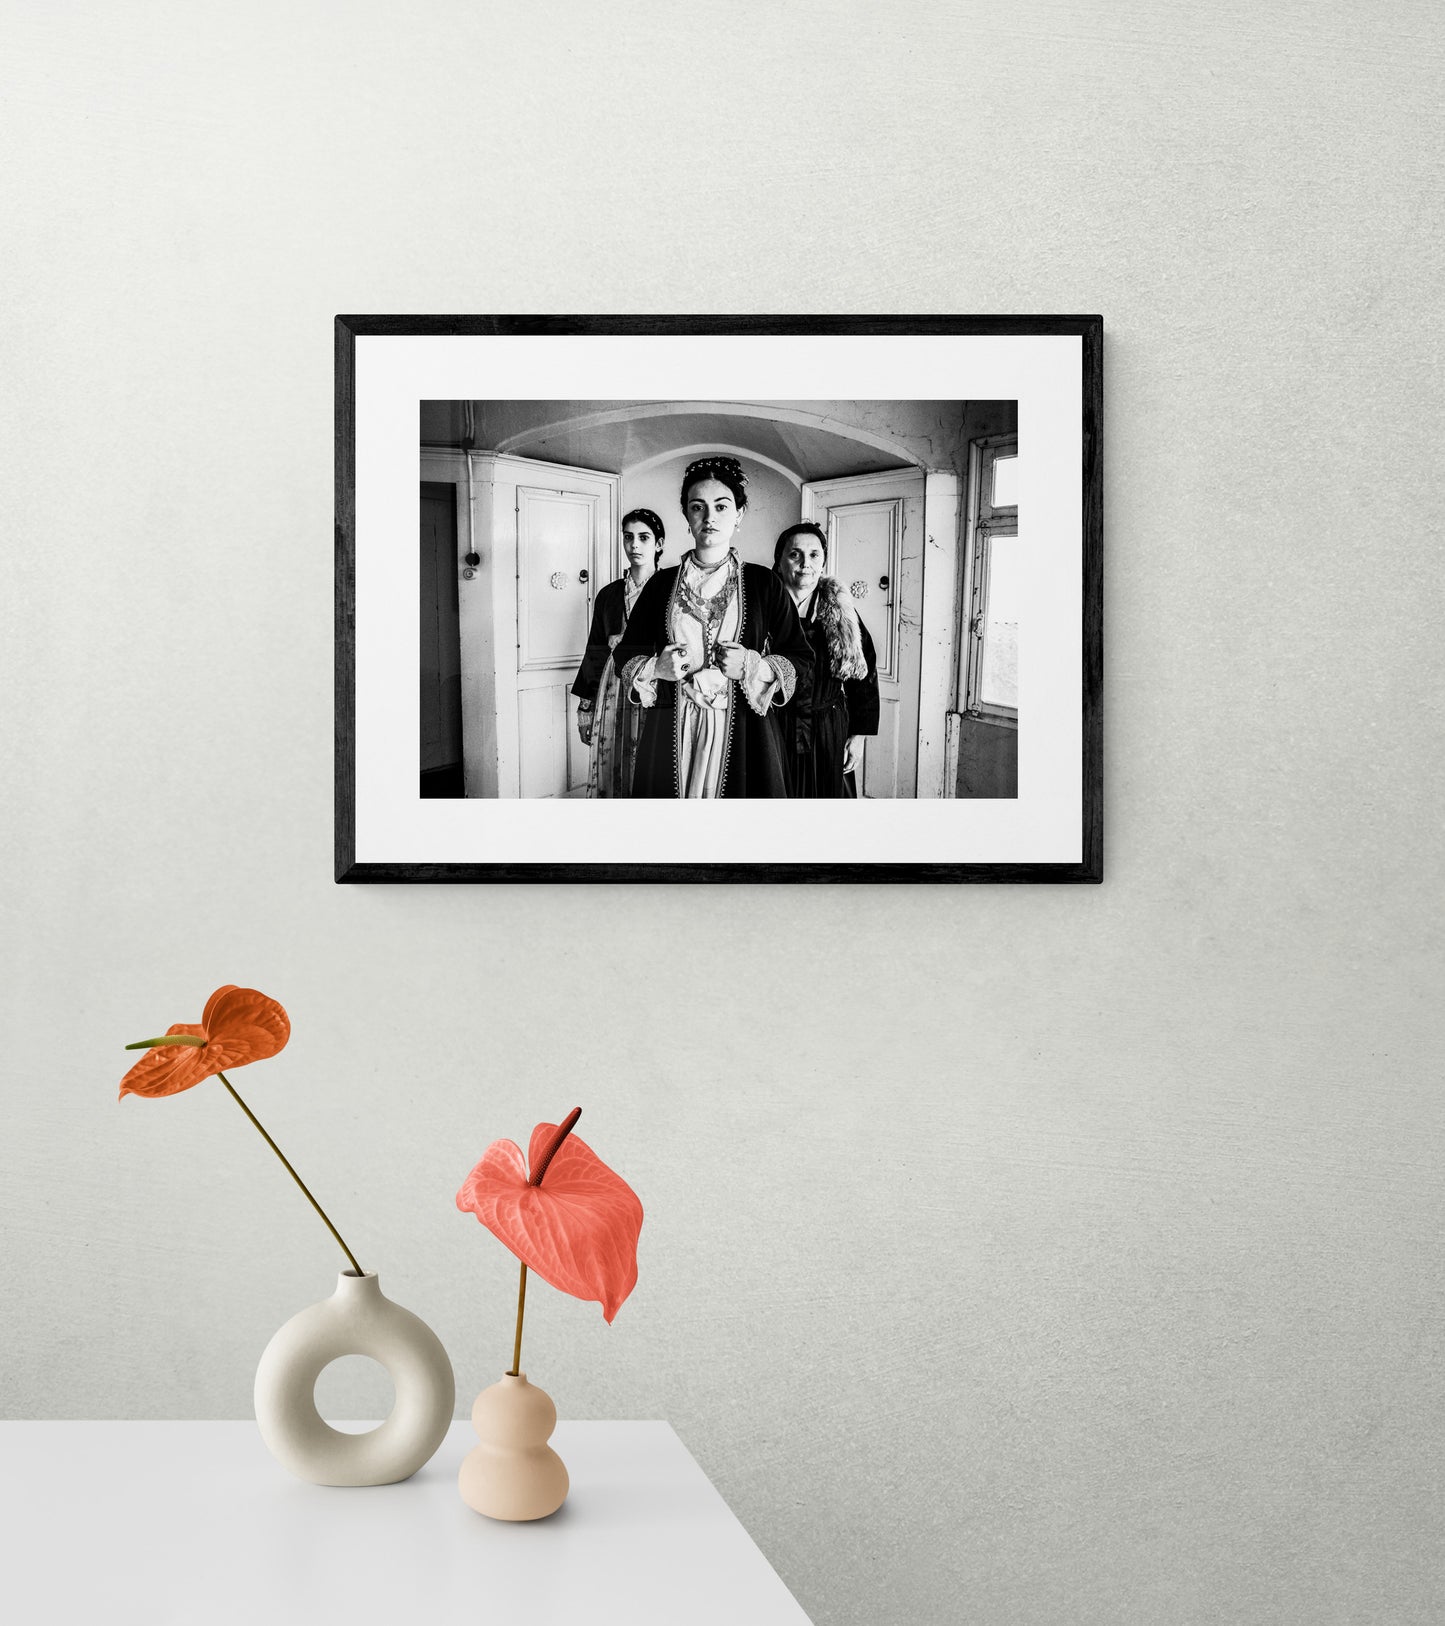 Black and White Photography Wall Art Greece | Costumes of Veria Macedonia by George Tatakis - single framed photo